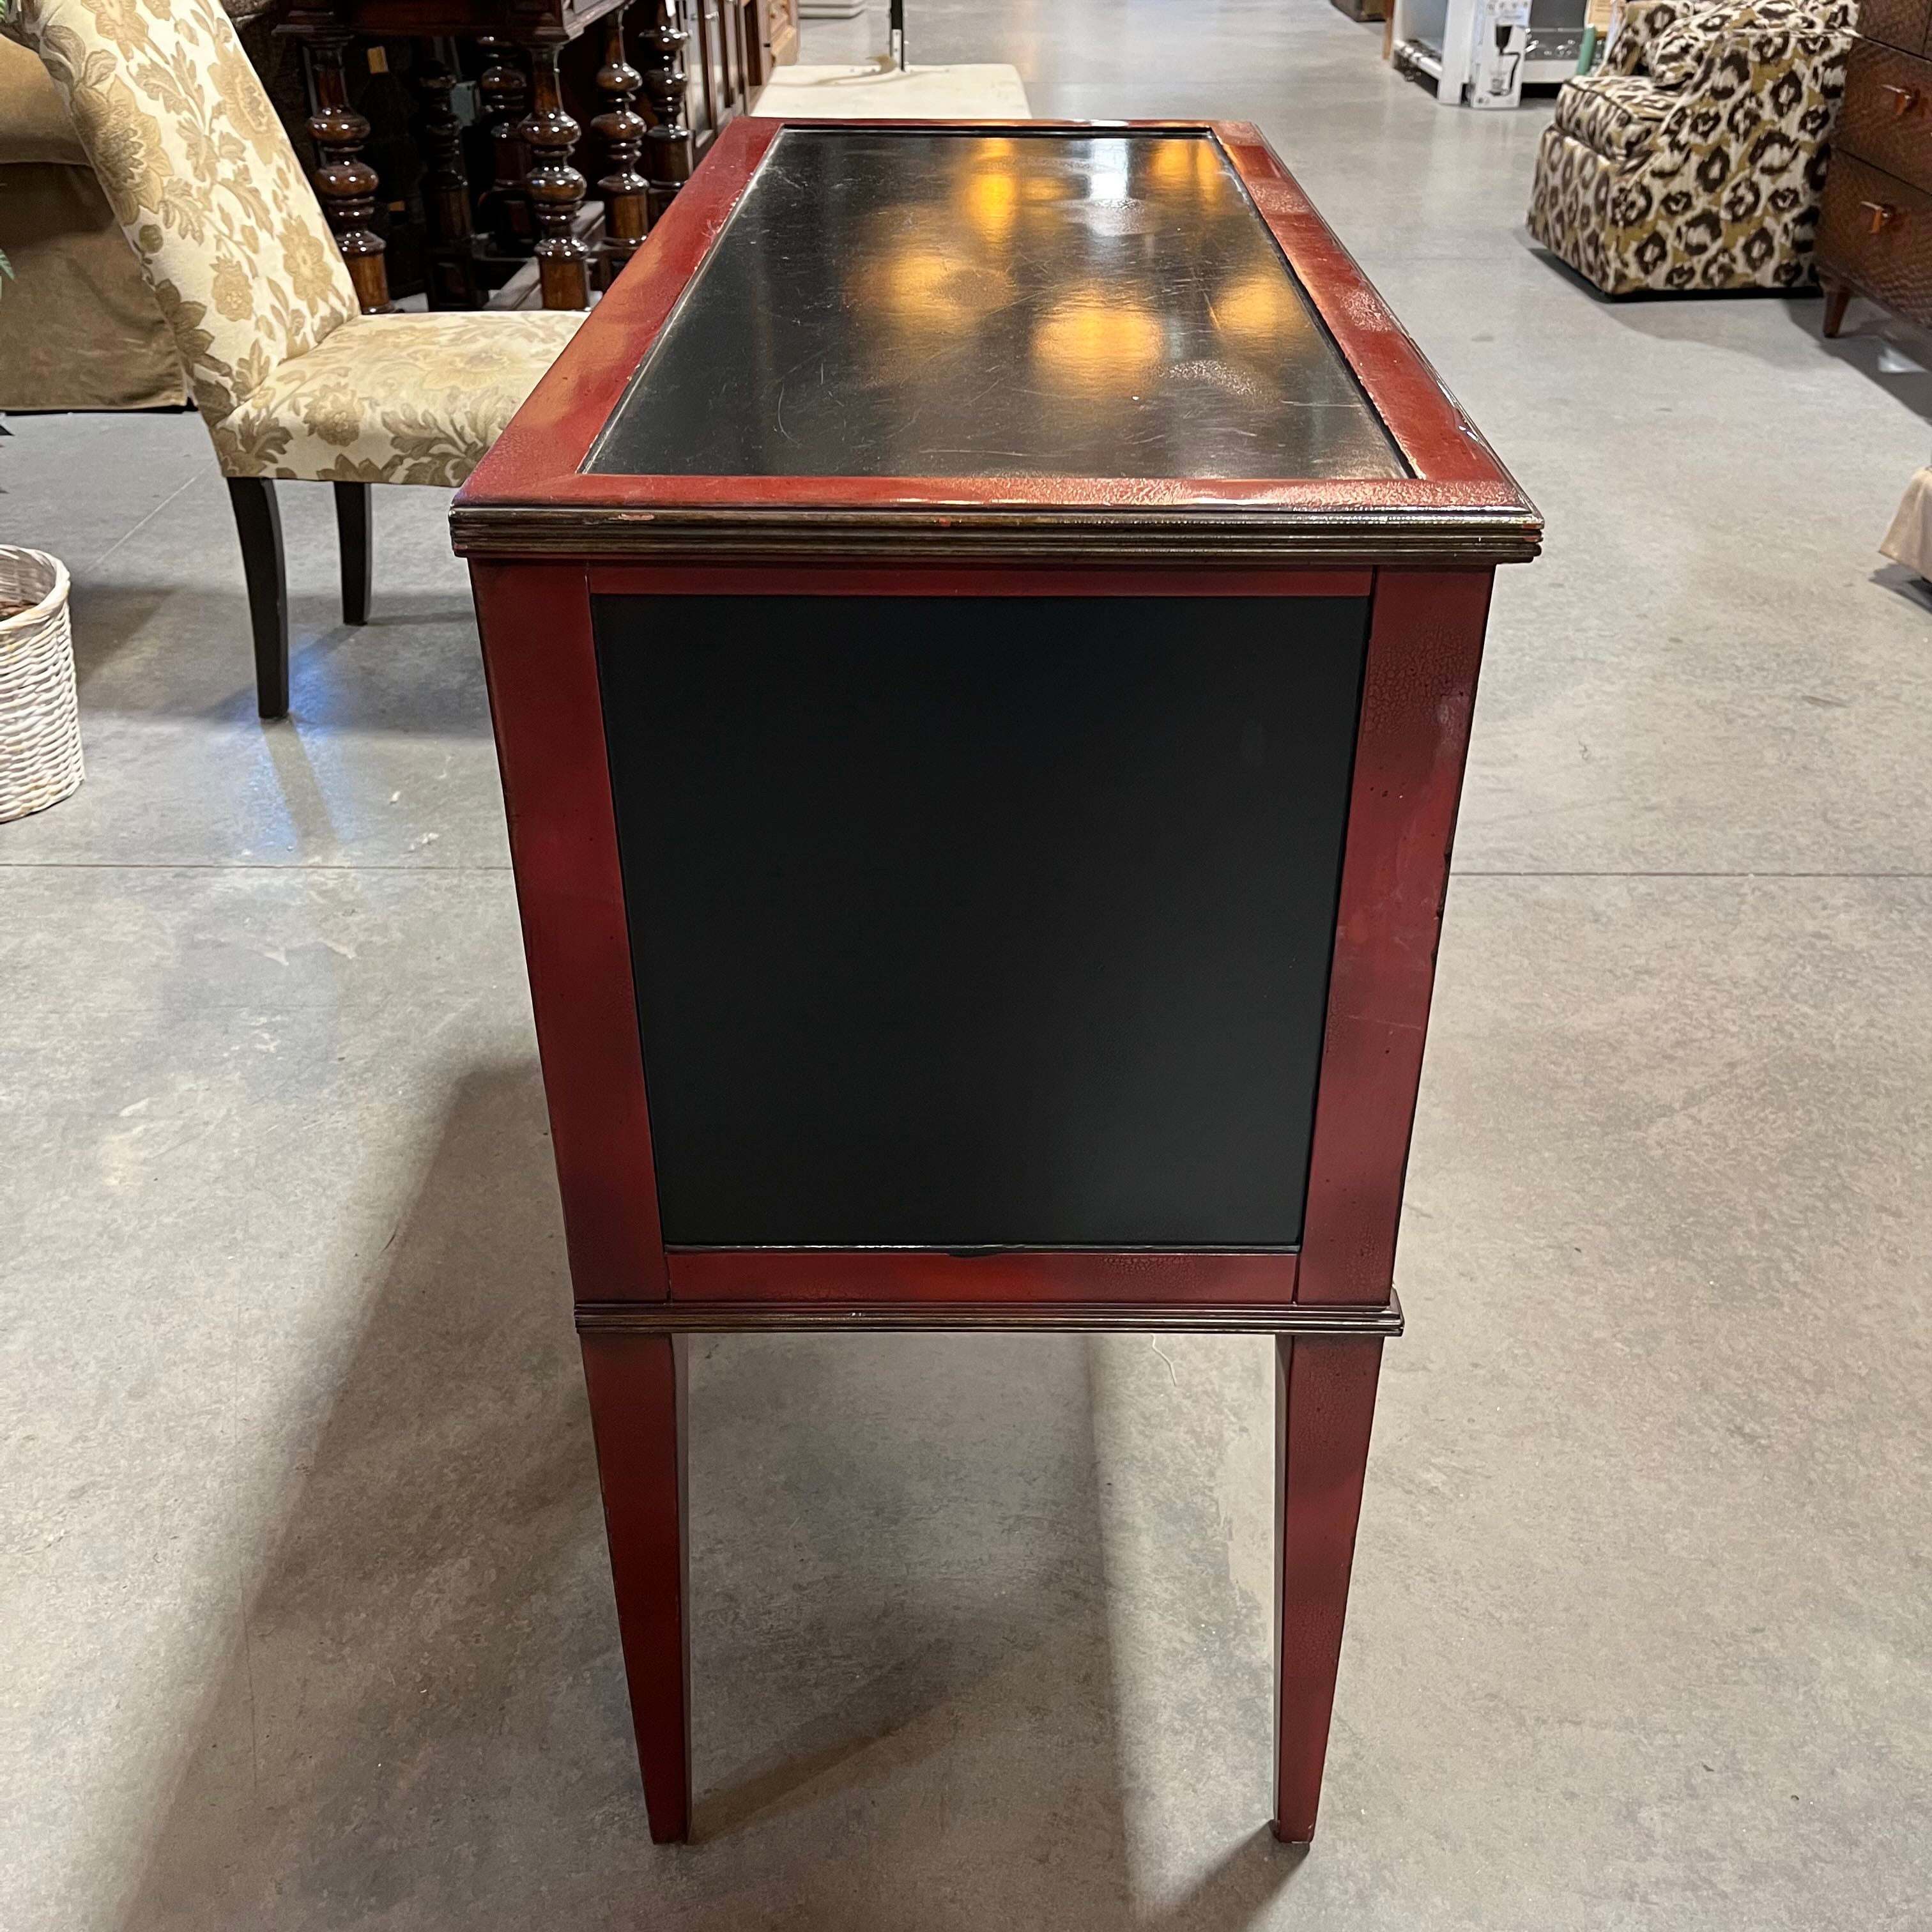 42"x 18"x 36" Vanguard Furniture Red Crackle & Black Antiqued 2 Drawer Chest Sofa Table